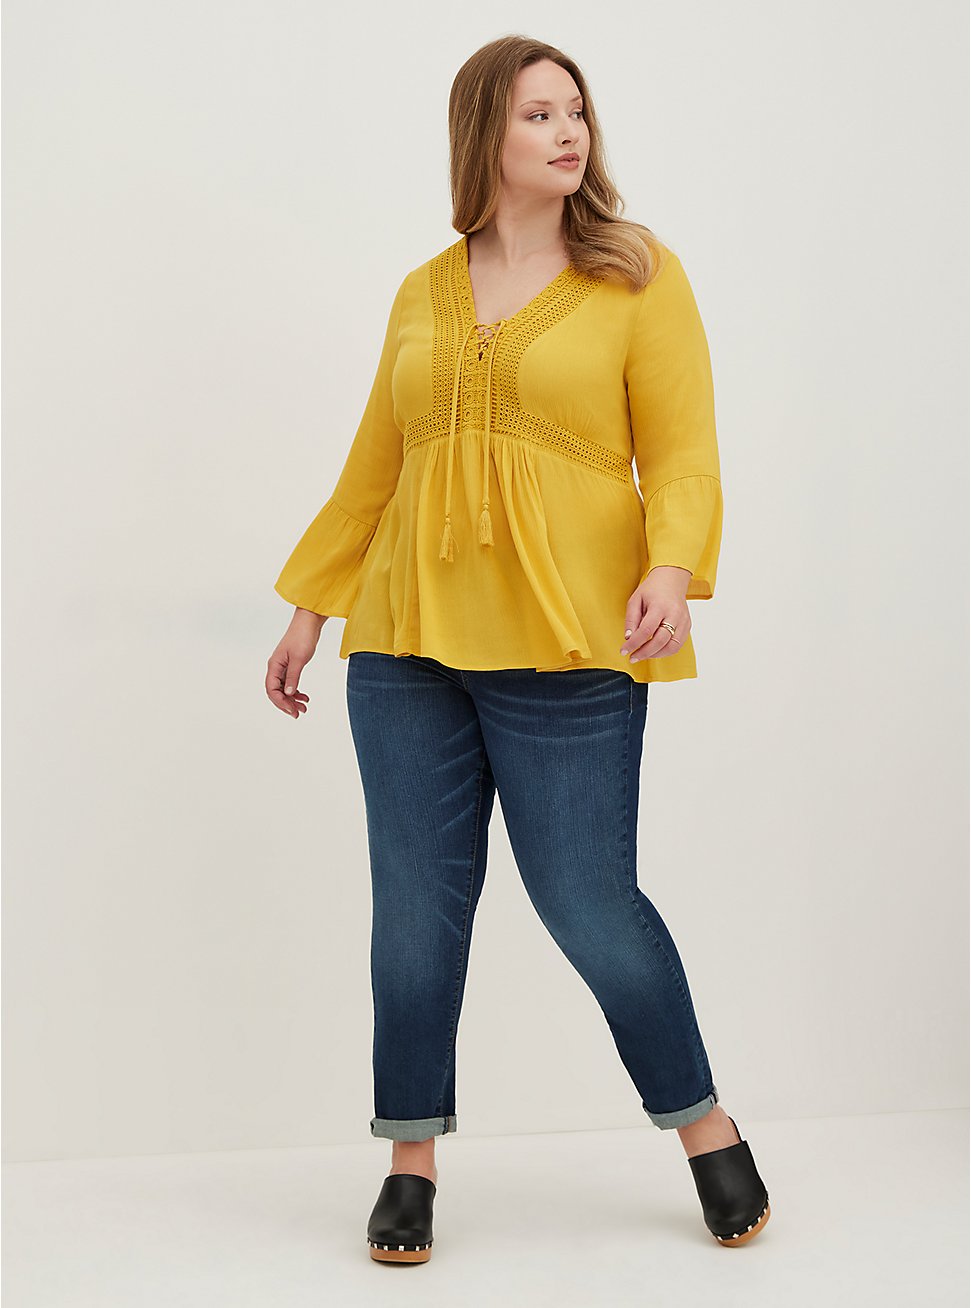 Plus Size Lace-Up Babydoll Top - Crinkle Gauze Mustard Yellow, MUSTARD, hi-res